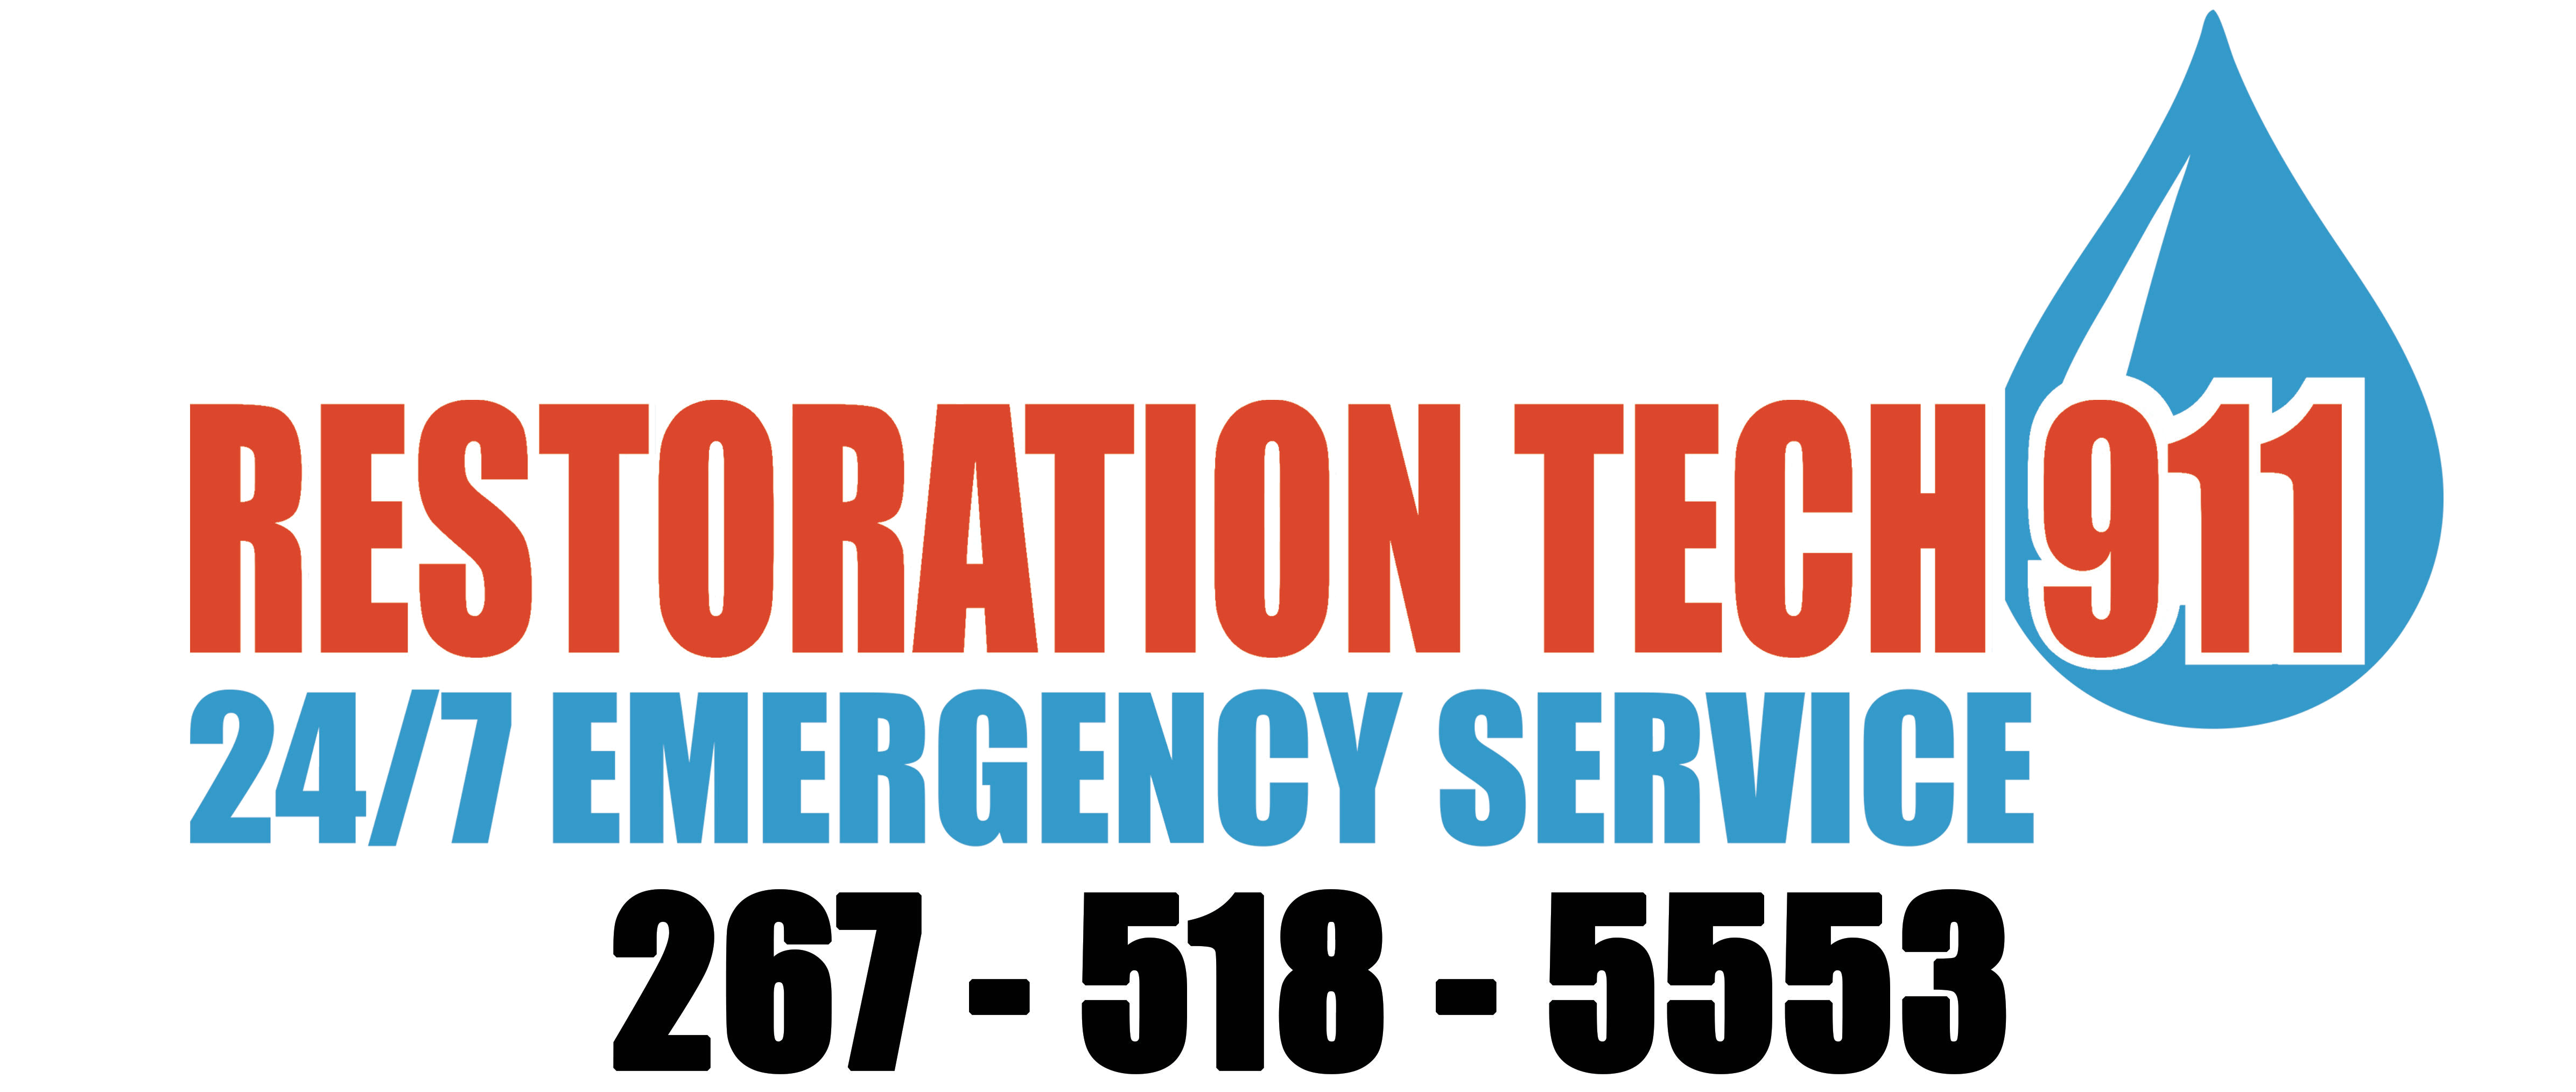 Restoration tech 911 - Filadelfia, Pennsylvania - Providing Restoration services like: water damage and fire damage on: Norristown, King of Prussia, West Chester, Drexel Hill and Ambler - logo